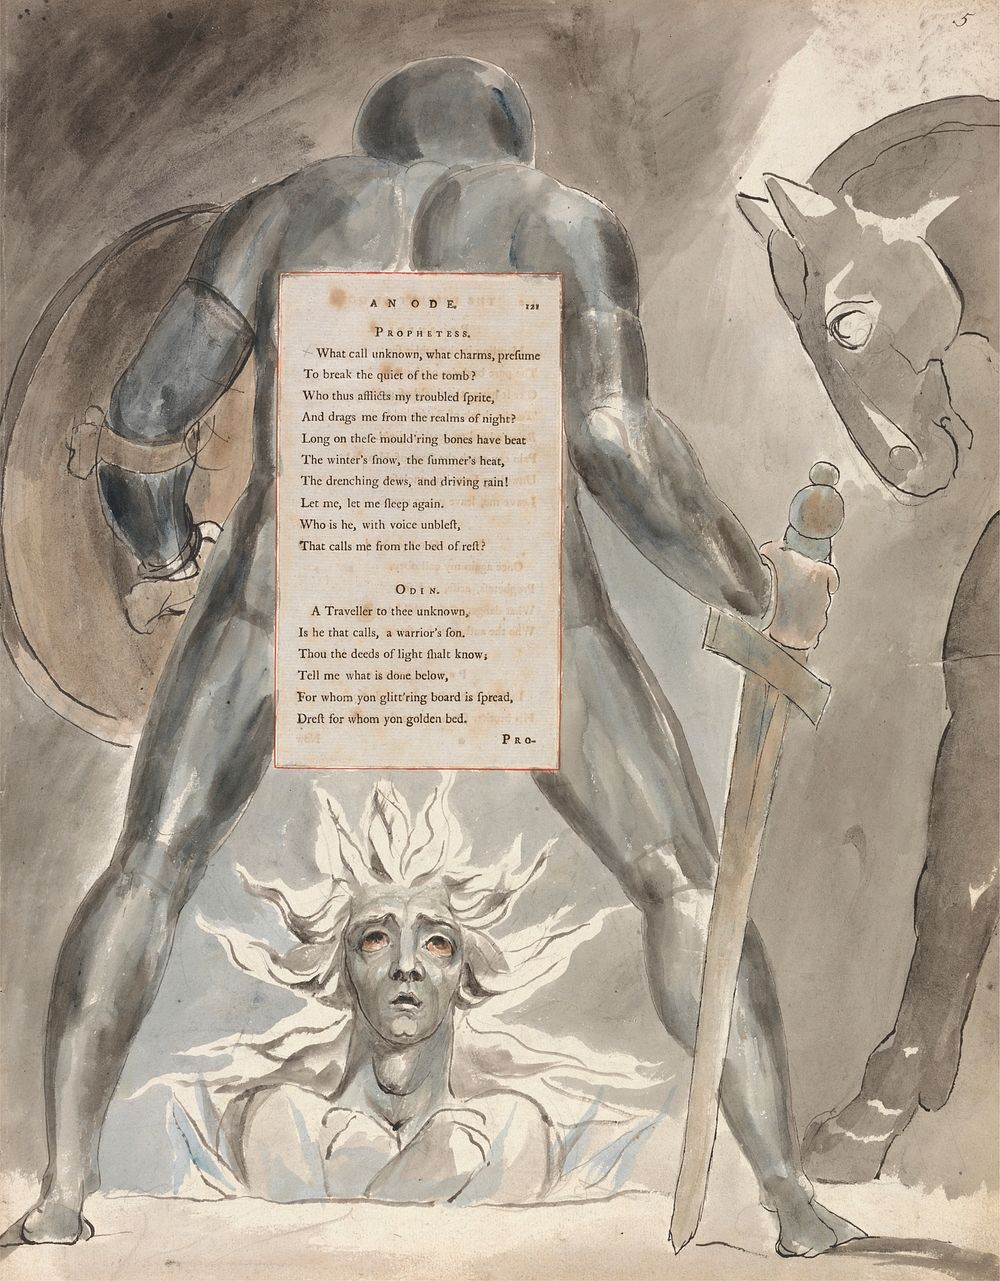 The Poems of Thomas Gray, Design 81, "The Descent of Odin." by William Blake. Original public domain image from Yale Center…